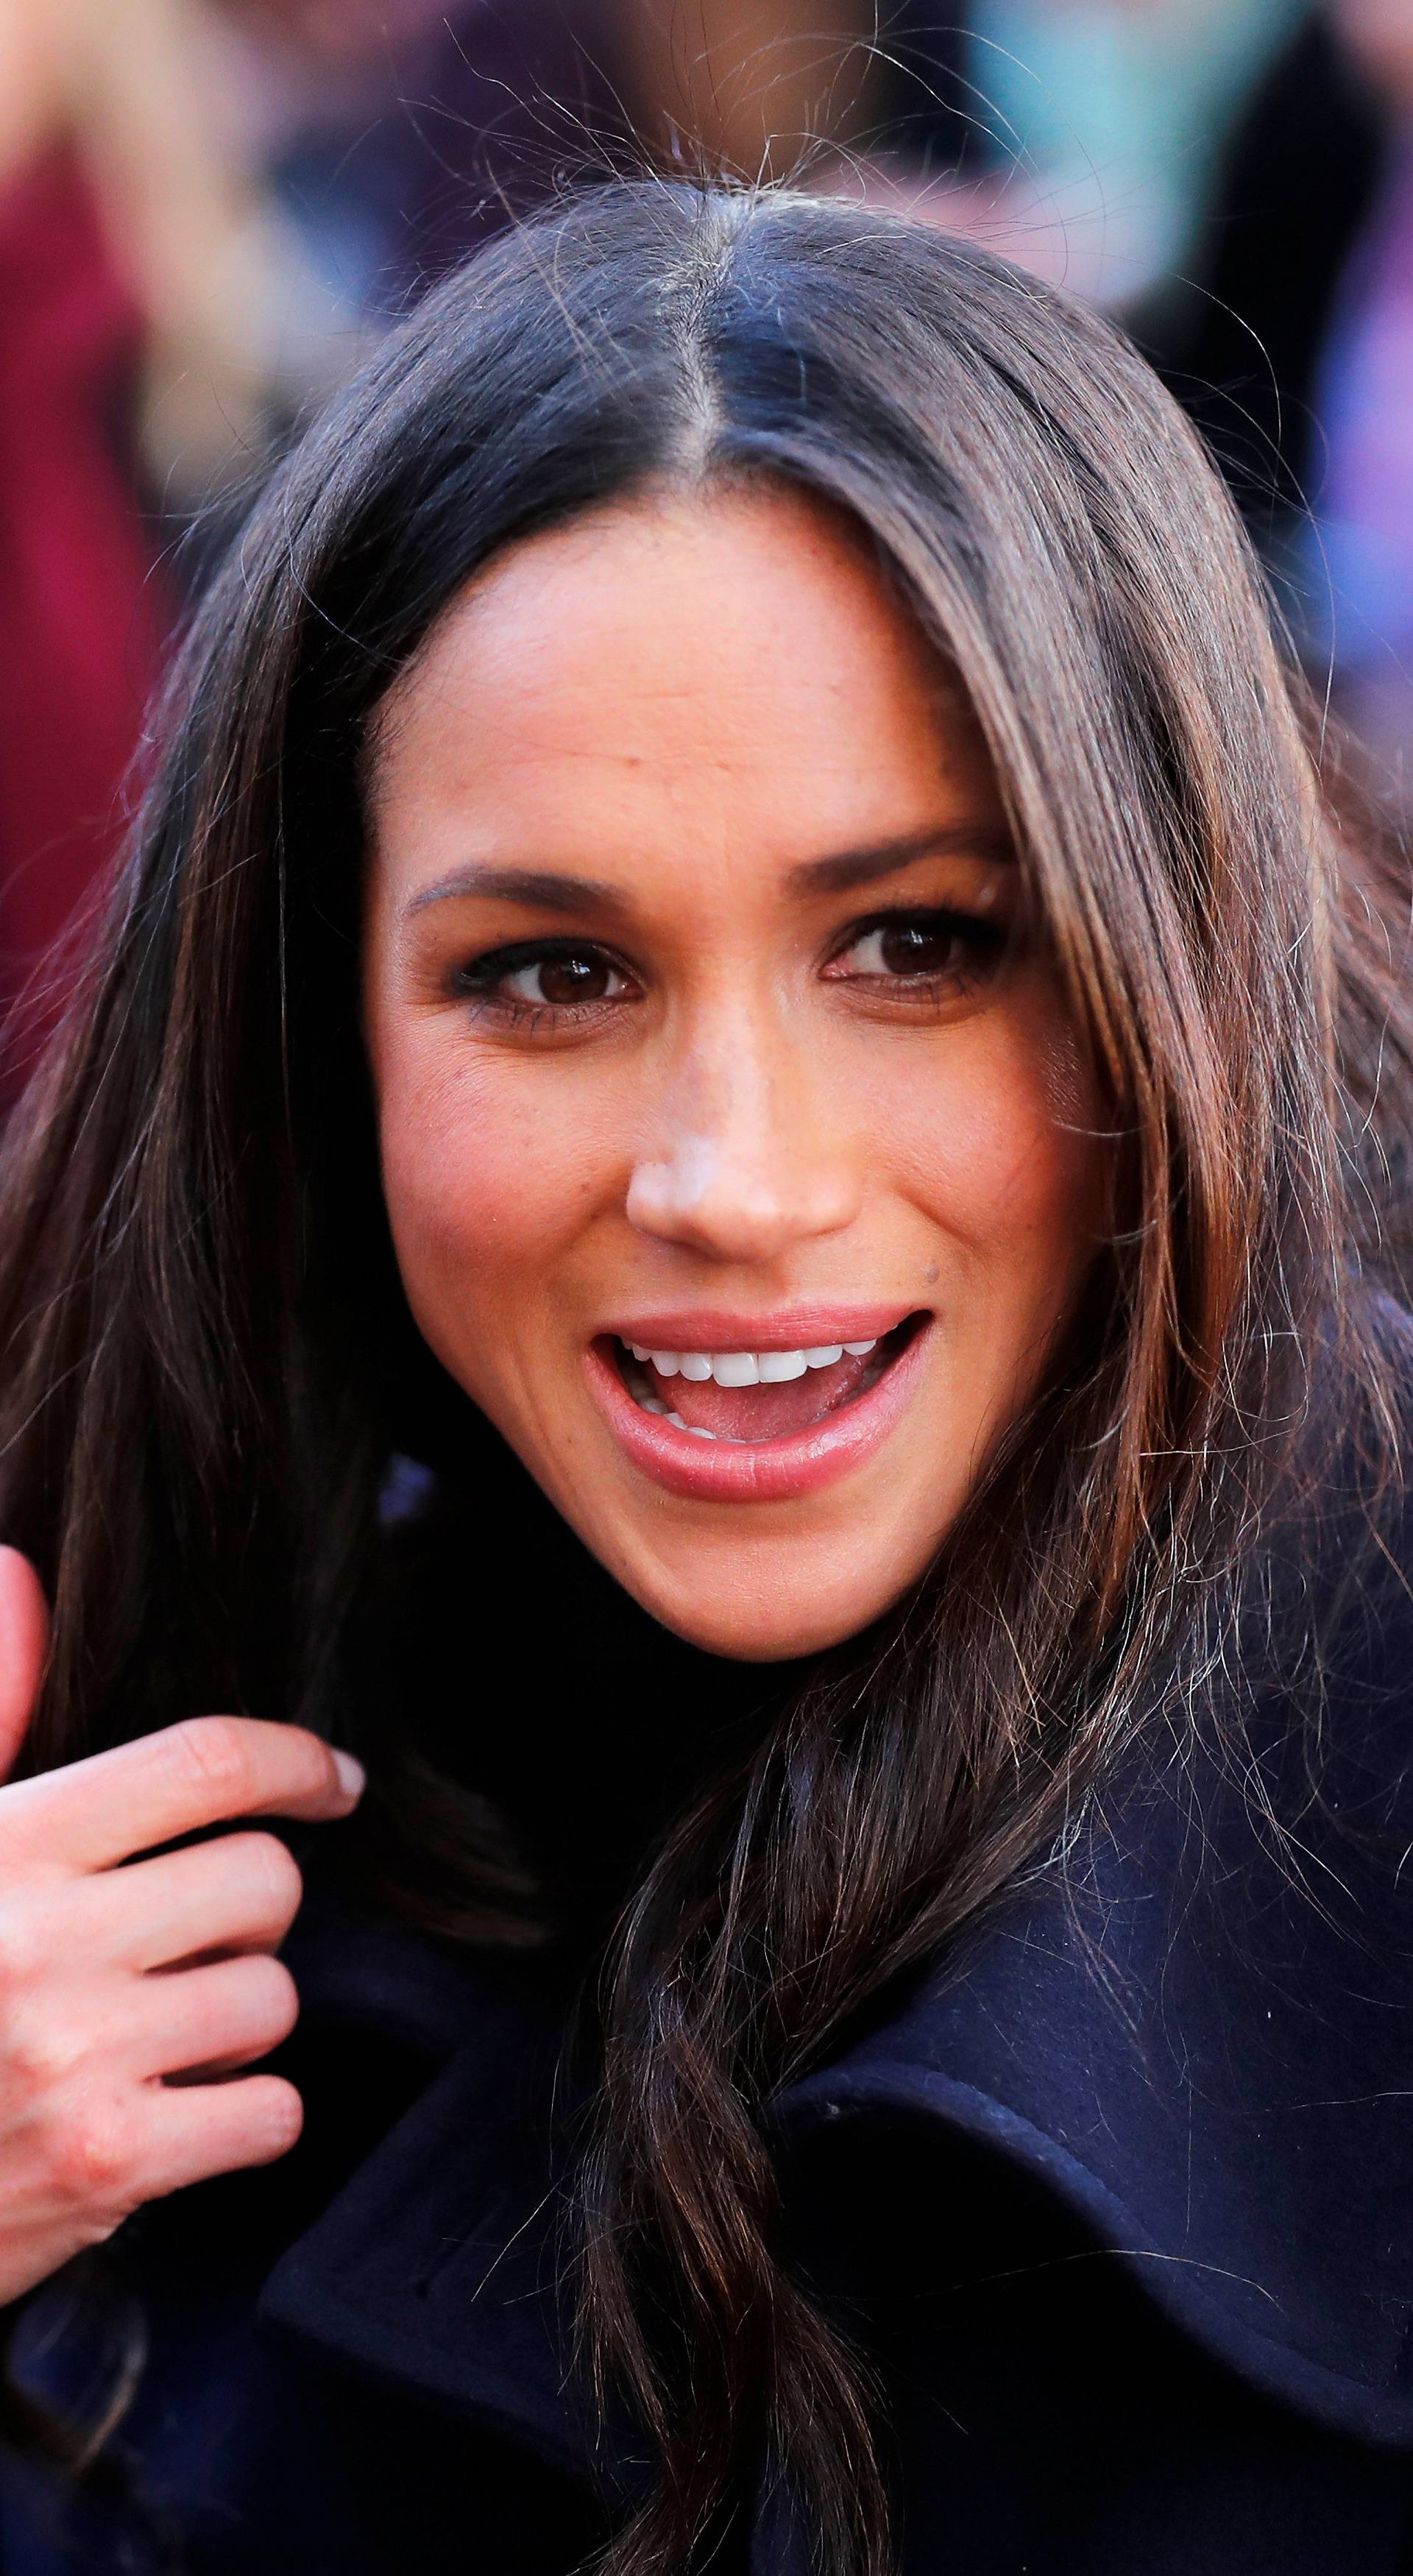 Meghan Markle greets well wishers as she arrives at an event with her fiancee Britain's Prince Harry in Nottingham